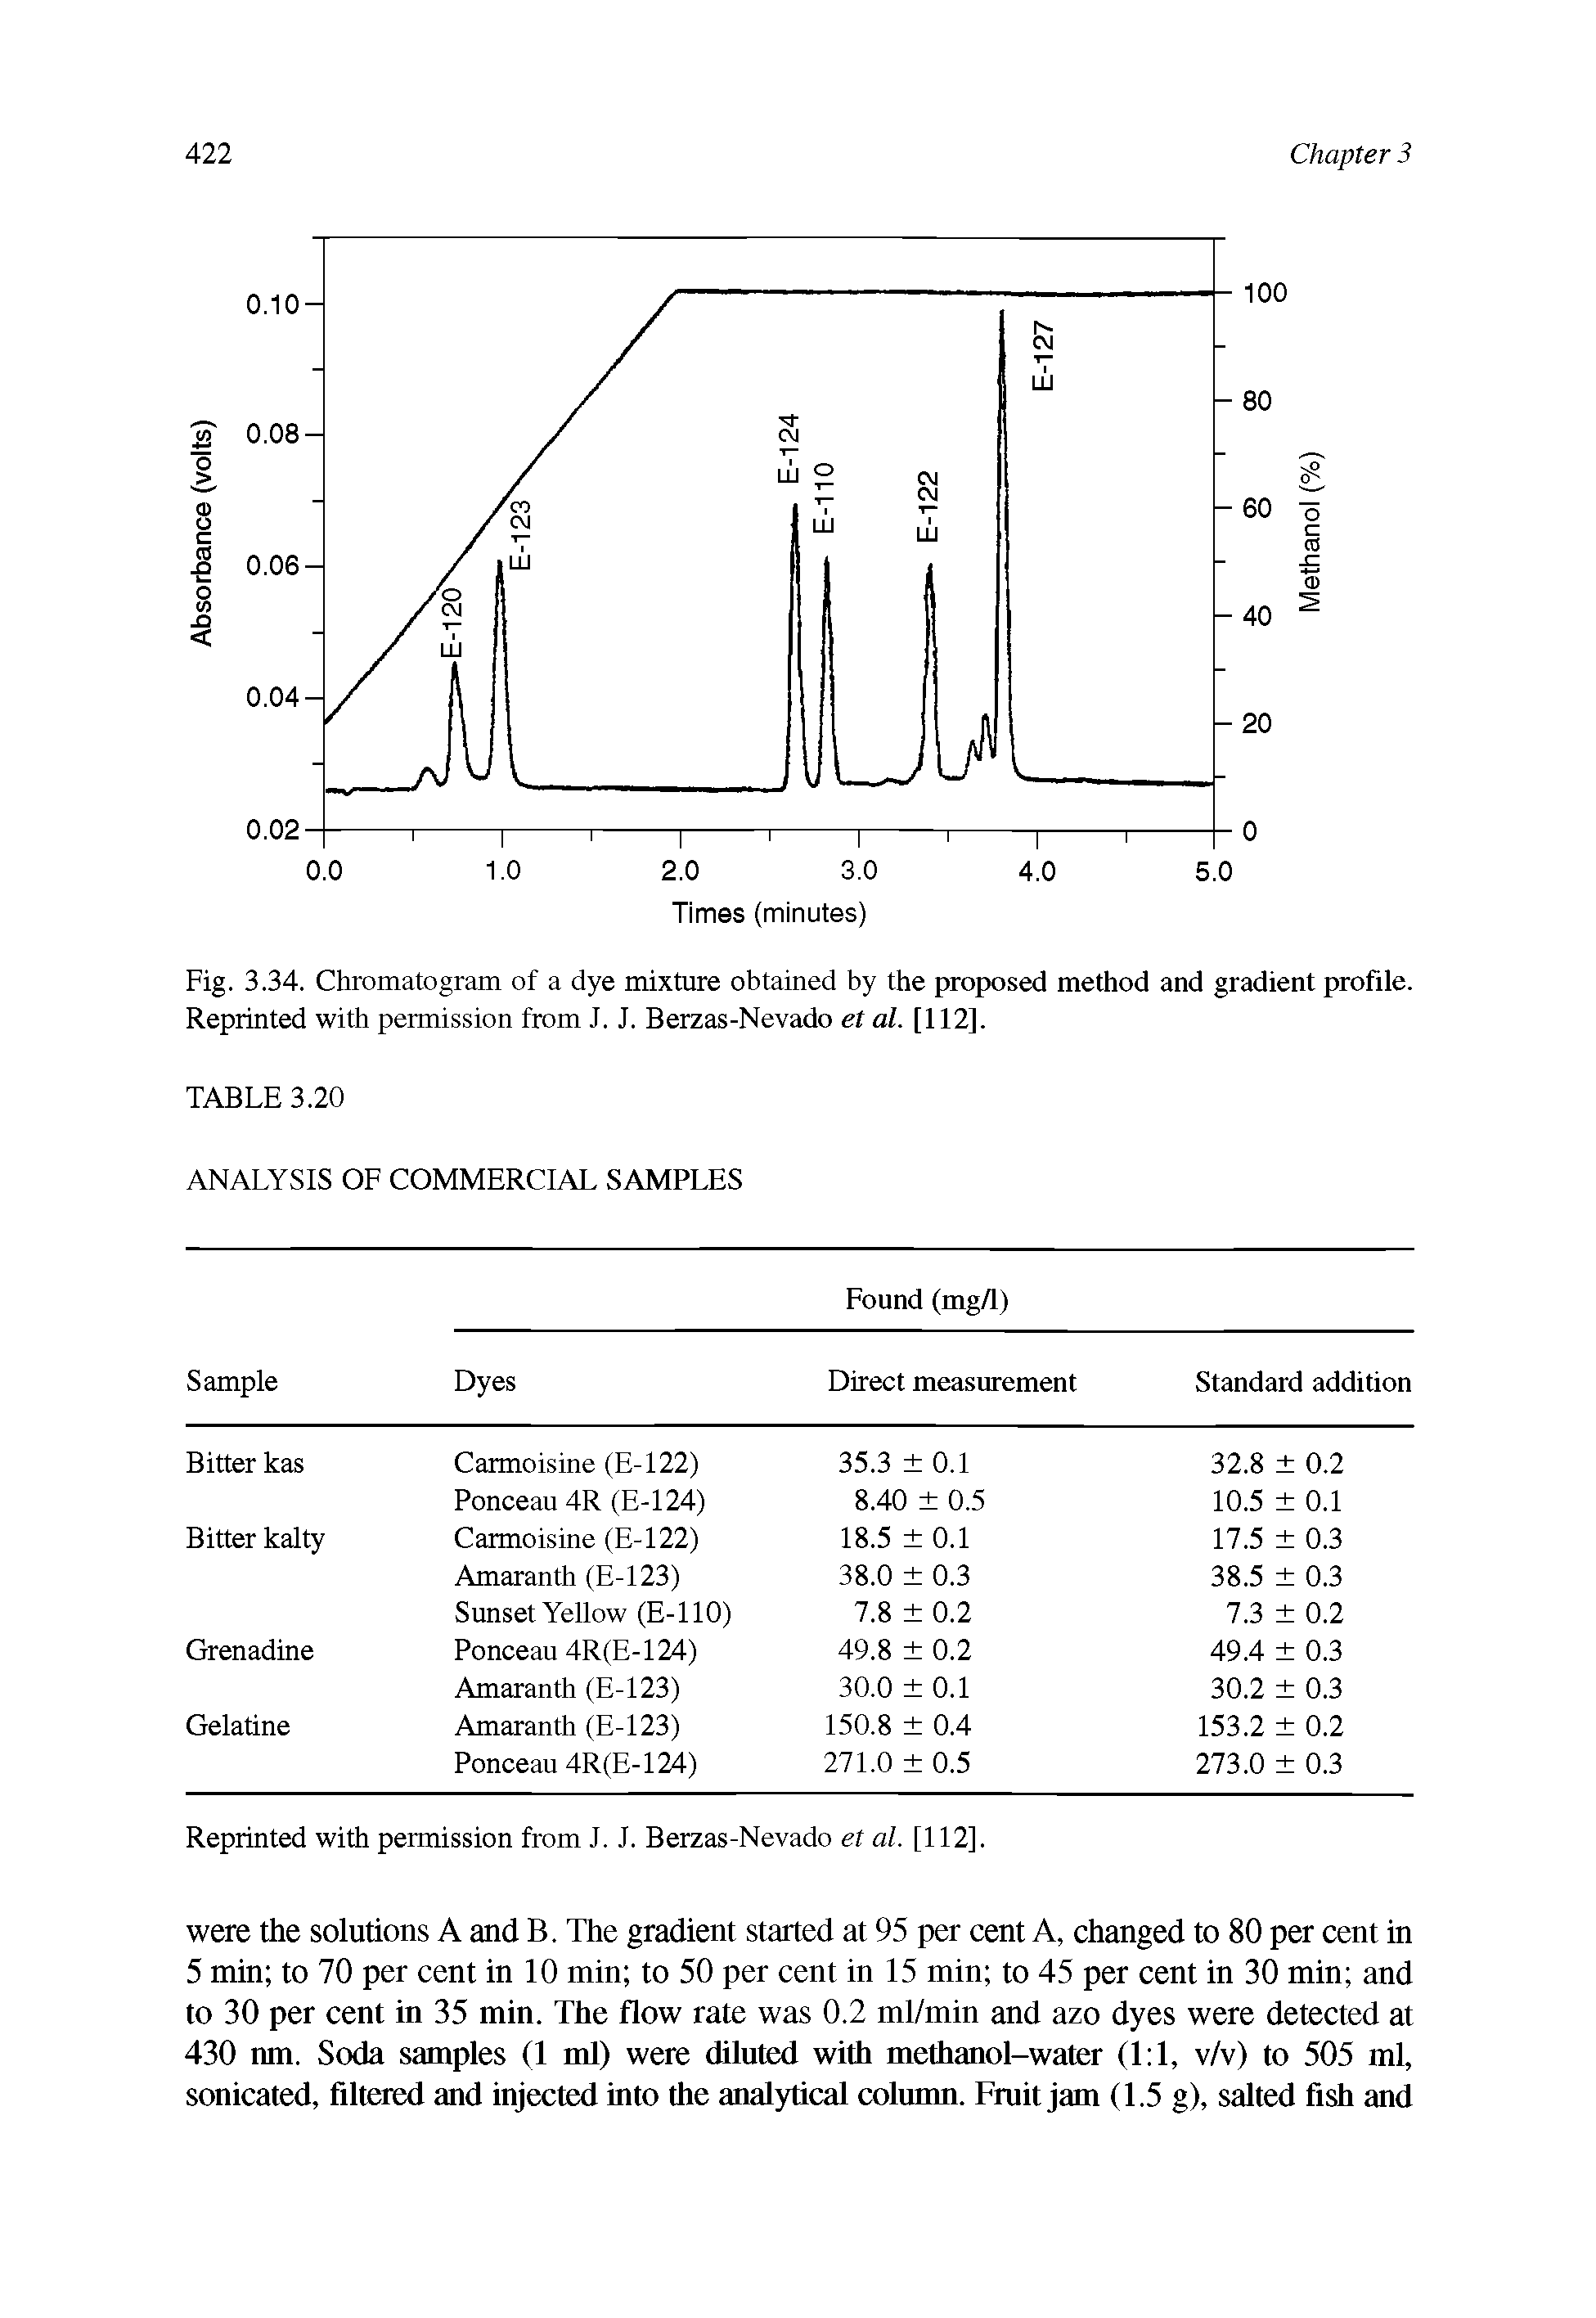 Fig. 3.34. Chromatogram of a dye mixture obtained by the proposed method and gradient profile. Reprinted with permission from J. J. Berzas-Nevado et al. [112].